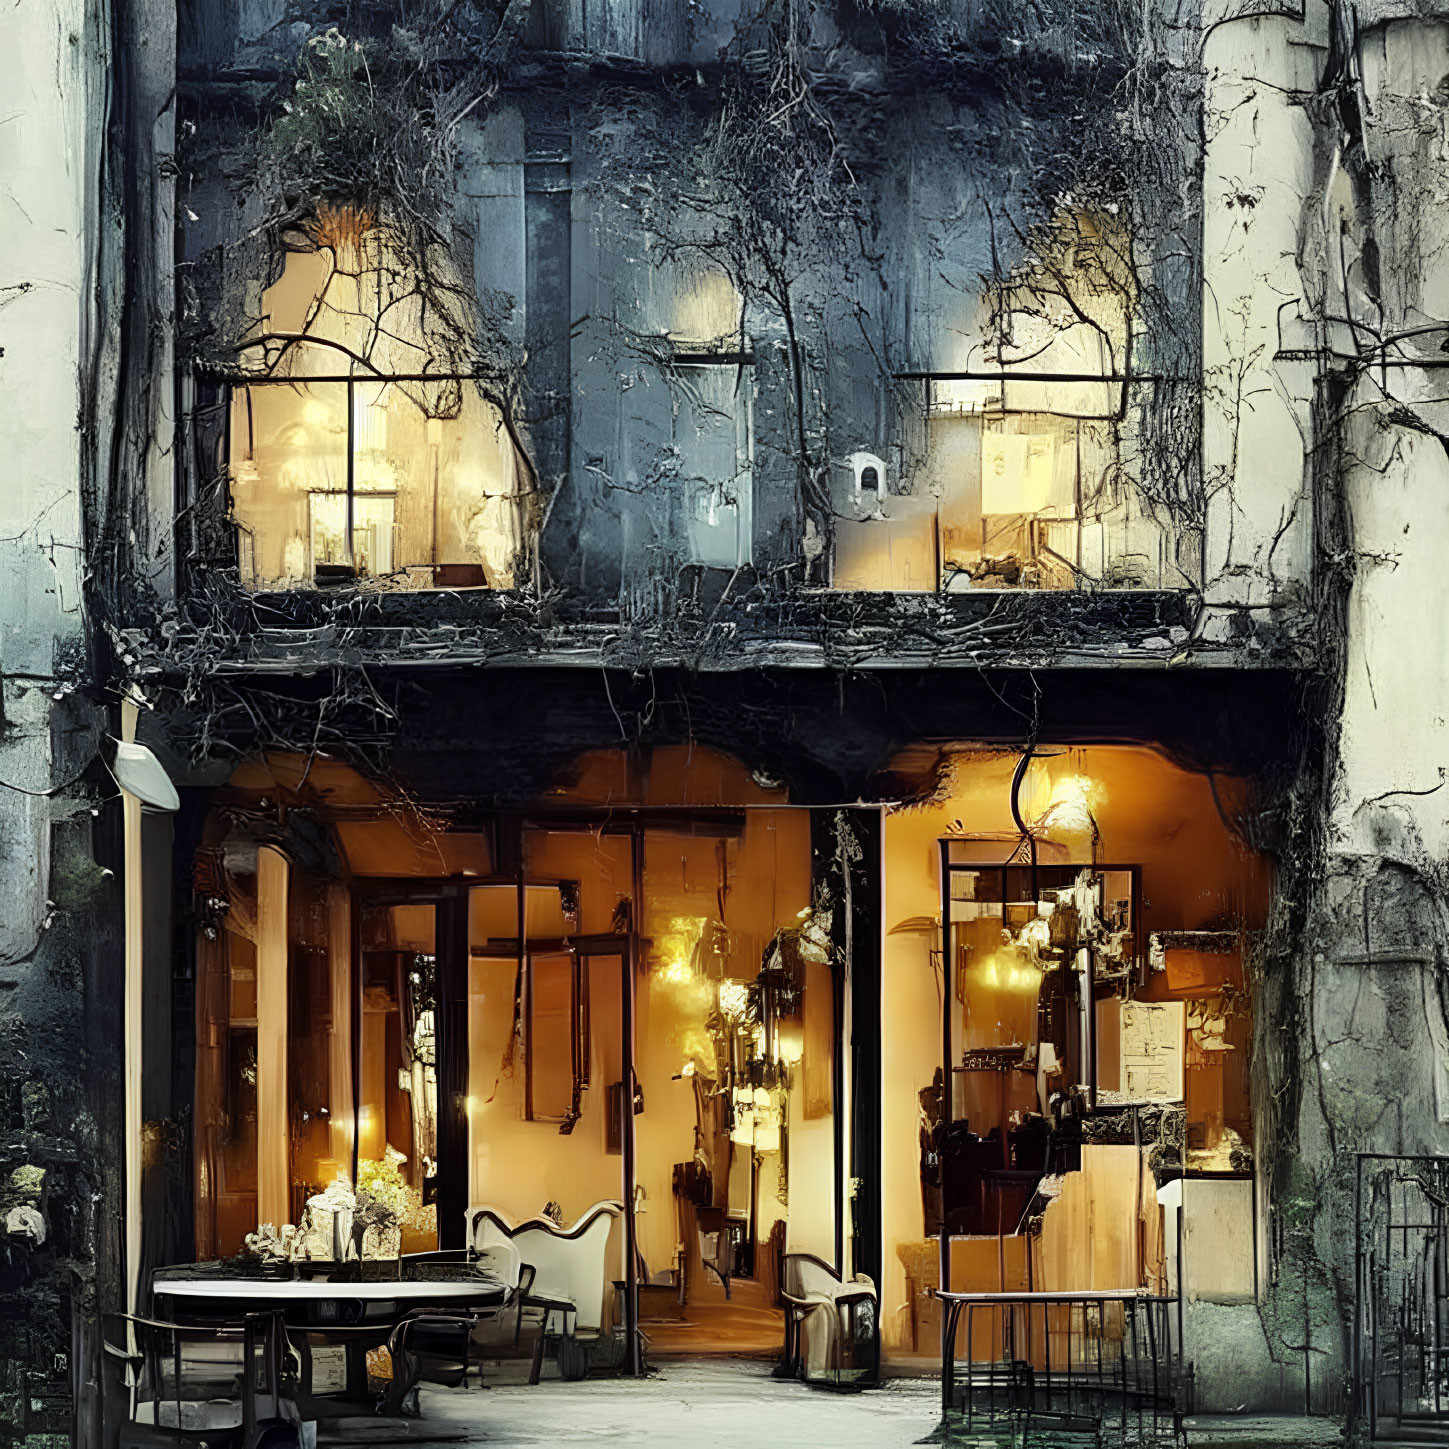 Vintage building with warm lights, ivy, and outdoor seating captured in atmospheric image